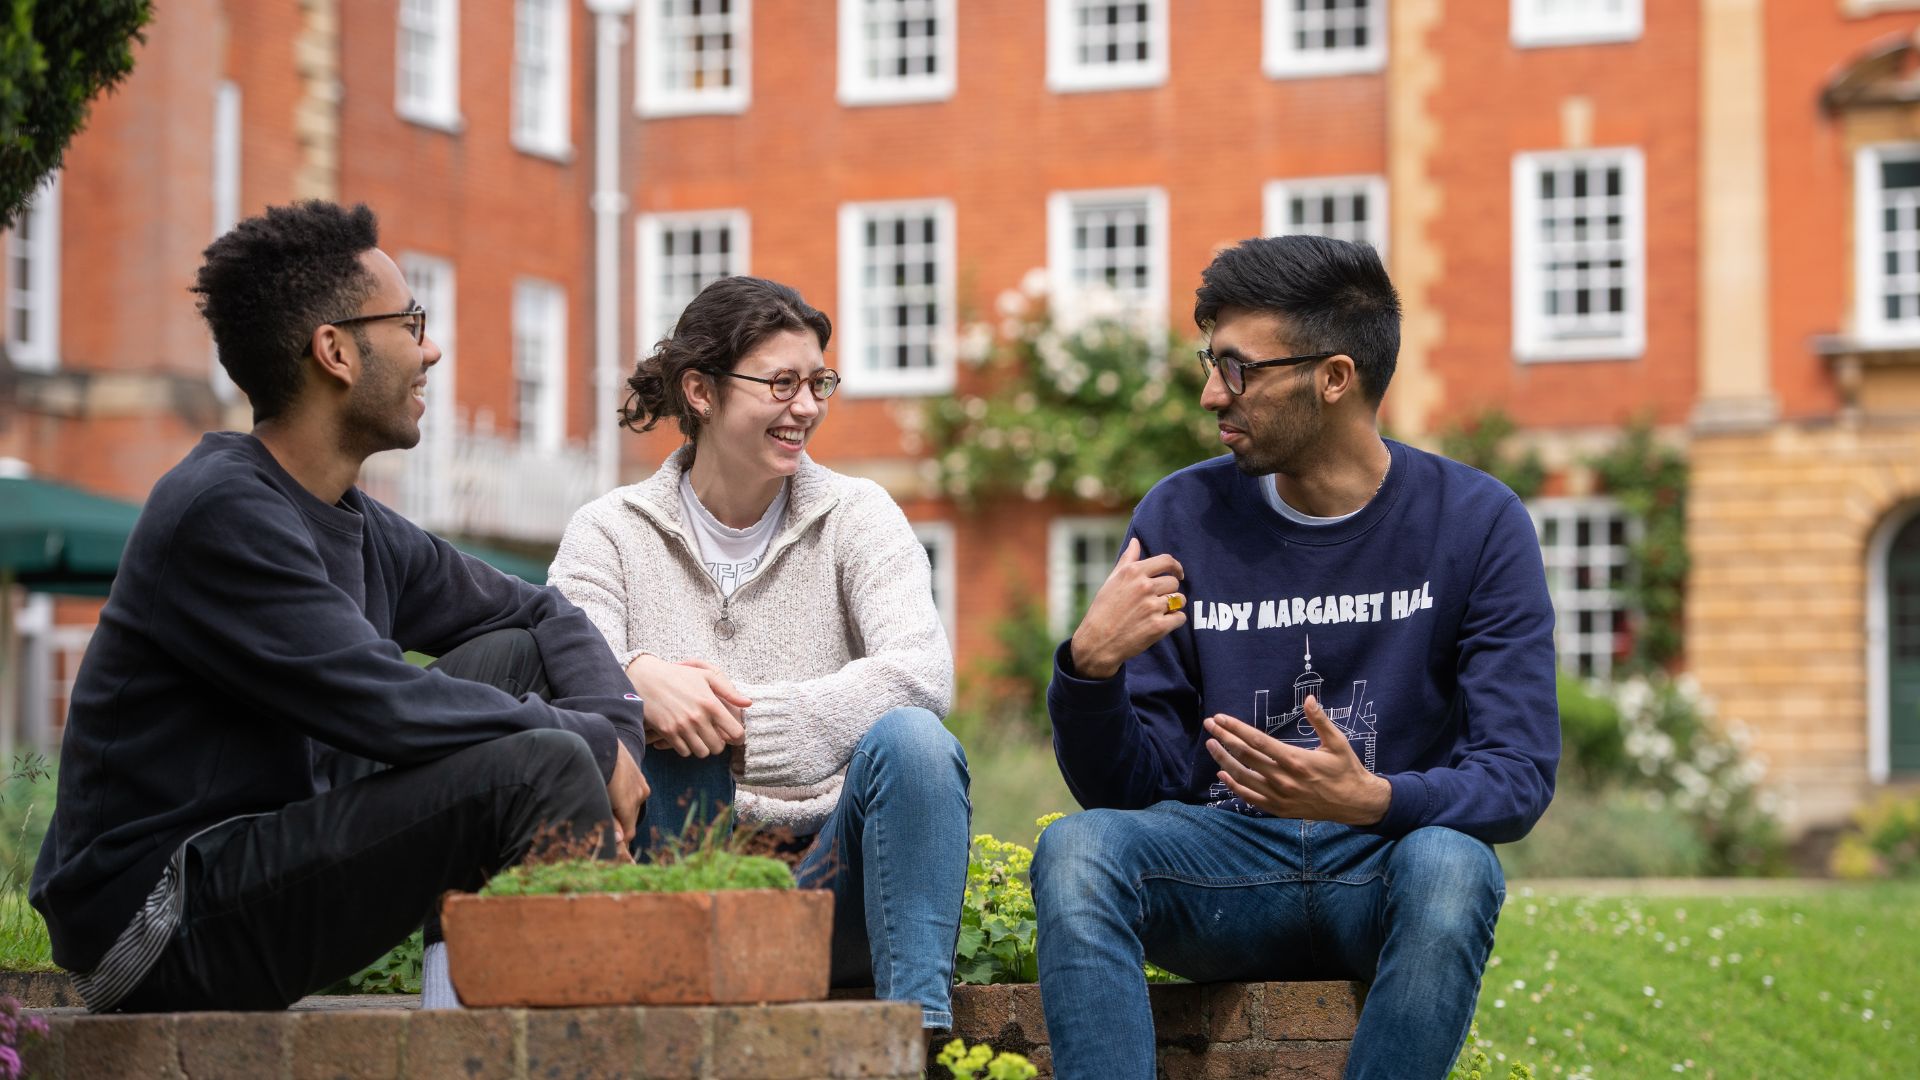 Three students, two men of Asian descent and a white woman, sit outside a red brick building talking and laughing